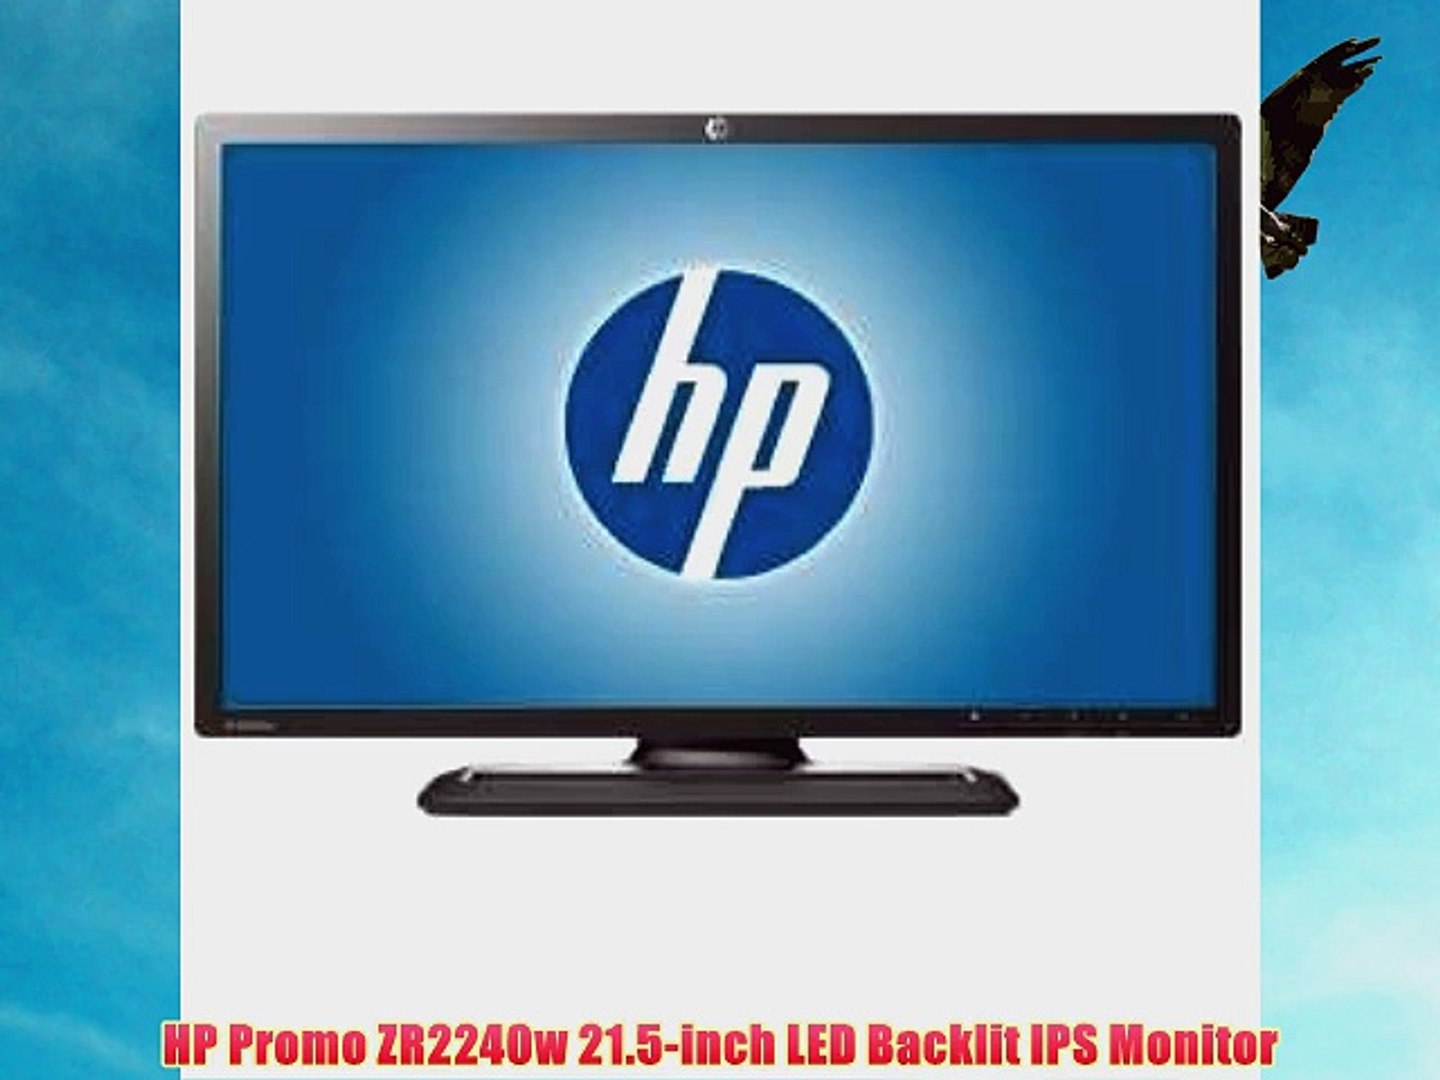 HP Promo ZR2240w 21.5-inch LED Backlit IPS Monitor - video Dailymotion